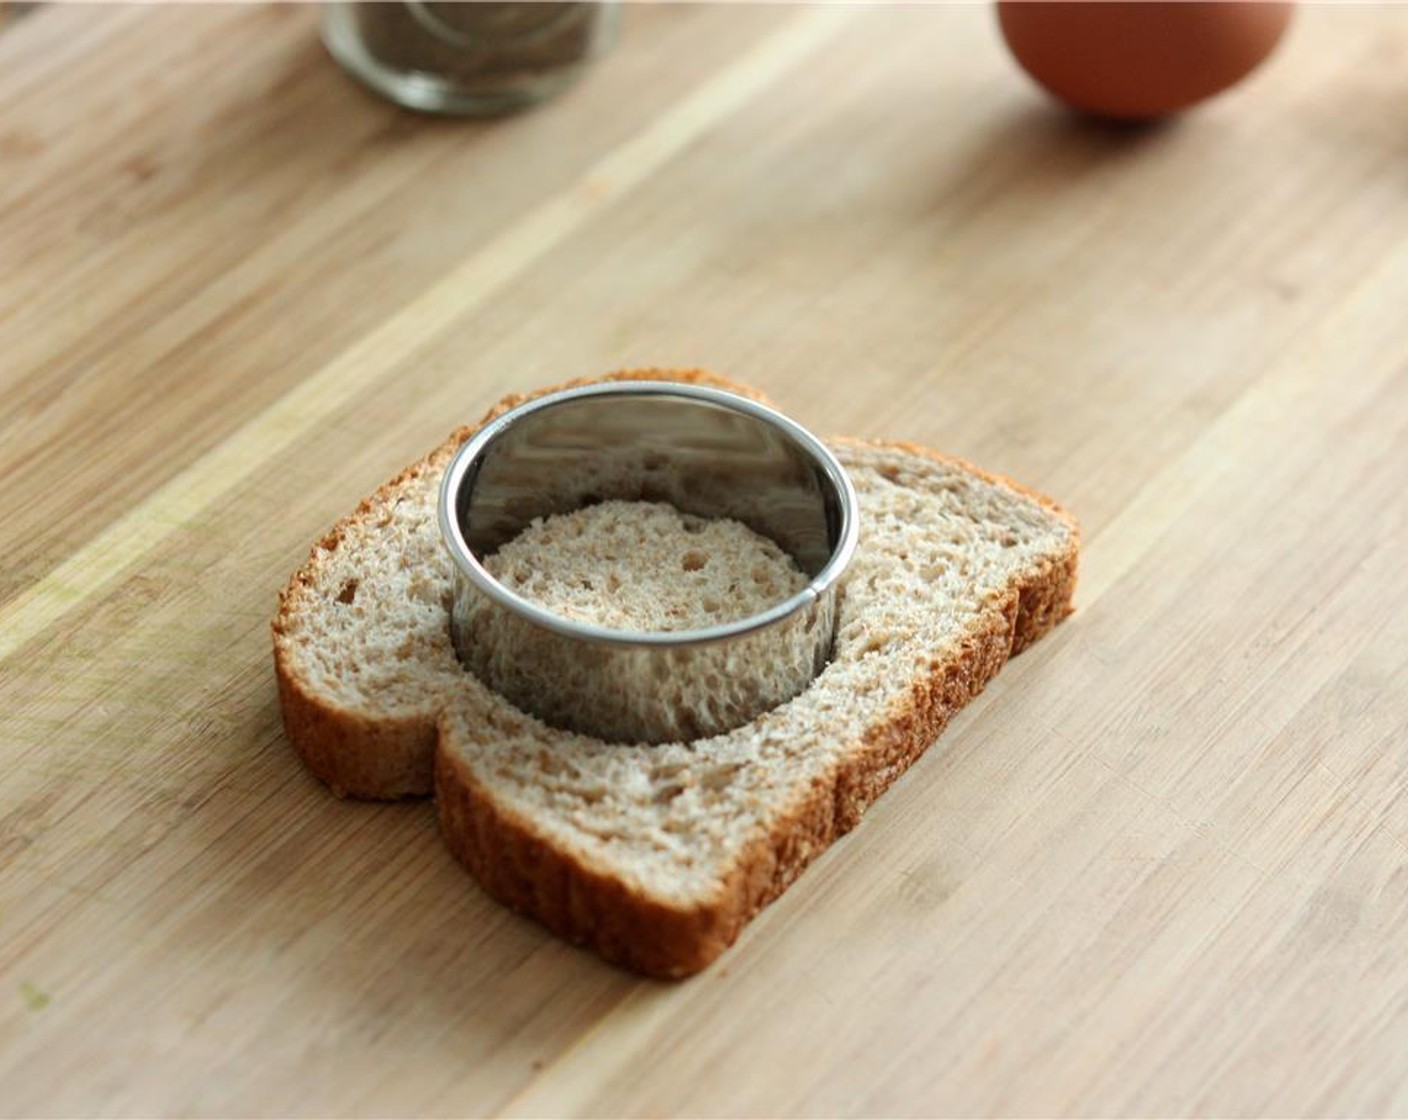 step 2 Use a round cookie cutter or biscuit cutter to cut a hole out of the Whole Wheat Bread (1 slice).